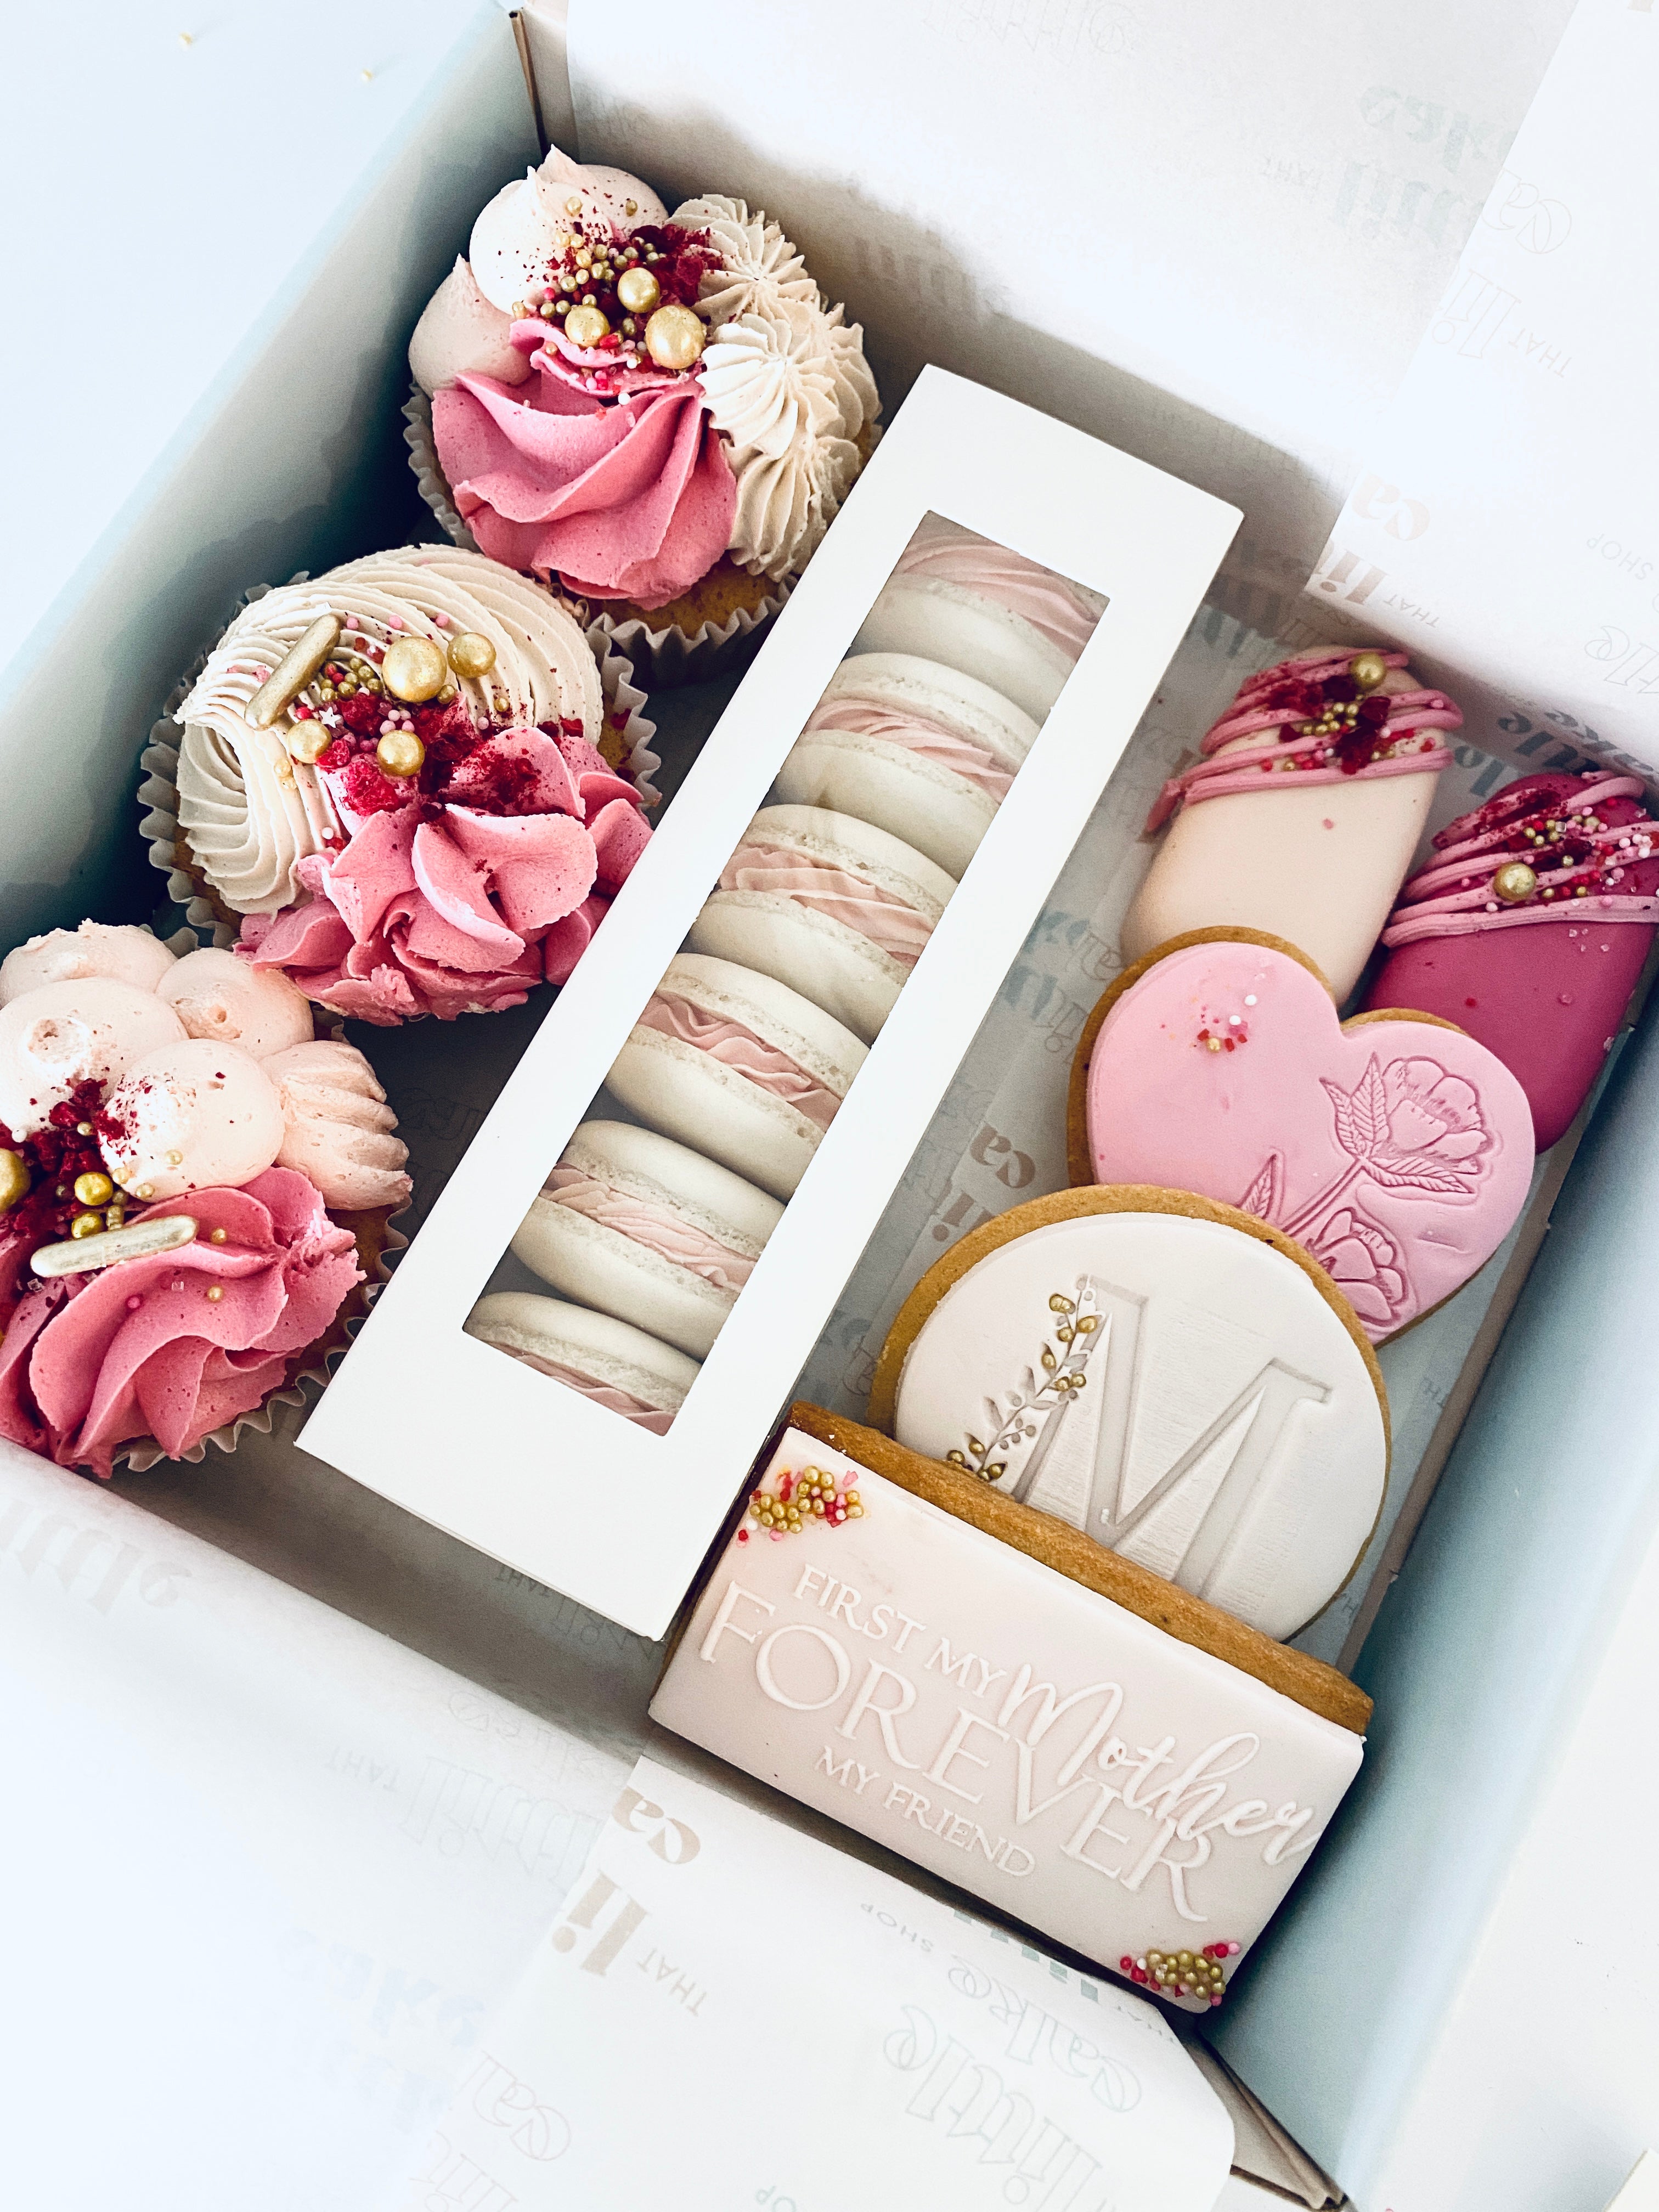 Deluxe Mother's Day gift box